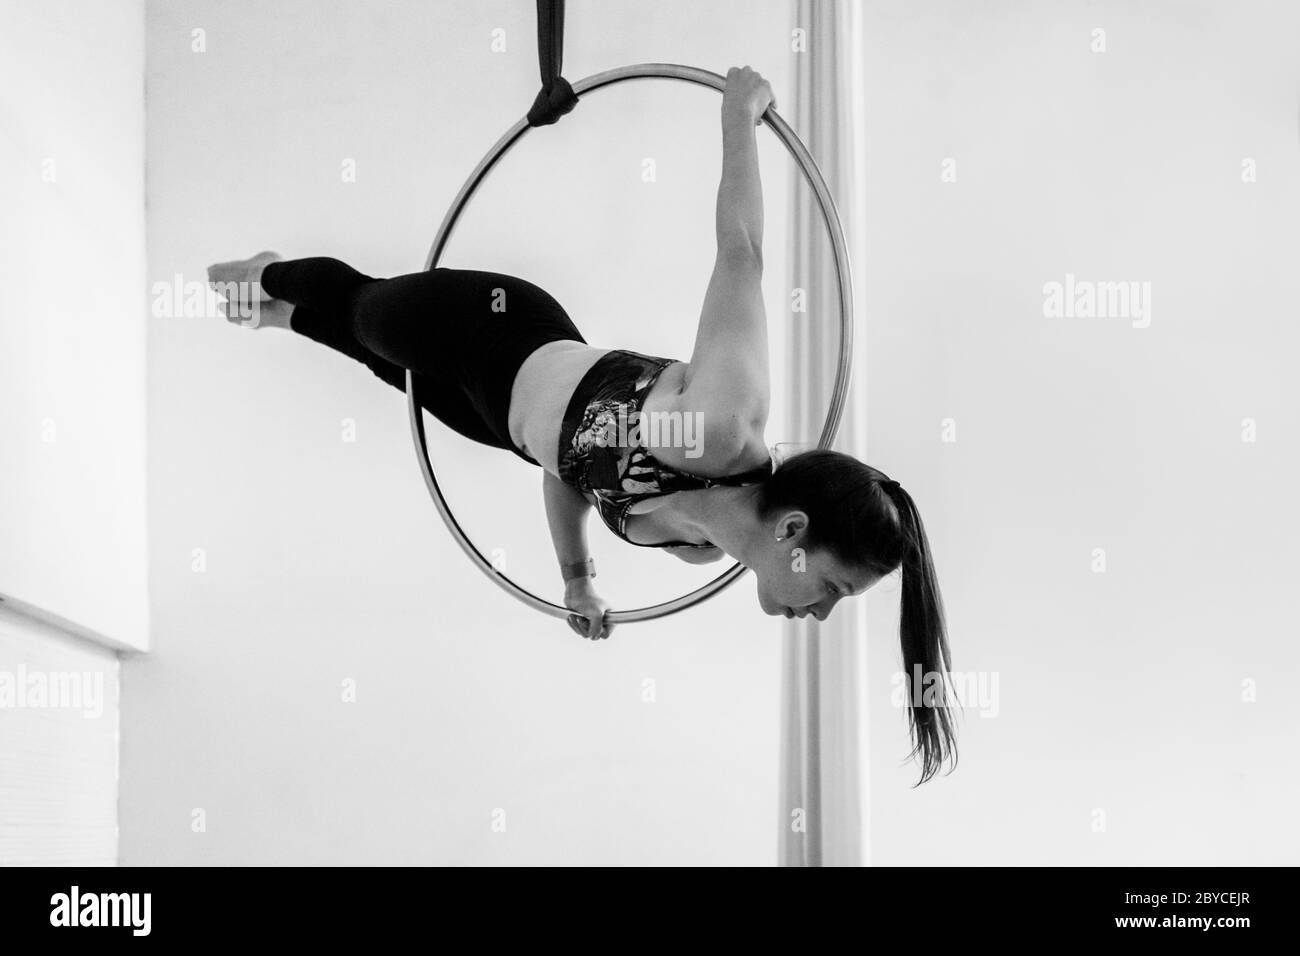 A Colombian aerial dancer performs a balance trick on aerial hoop during a training session in a gym in Medellín, Colombia. Stock Photo